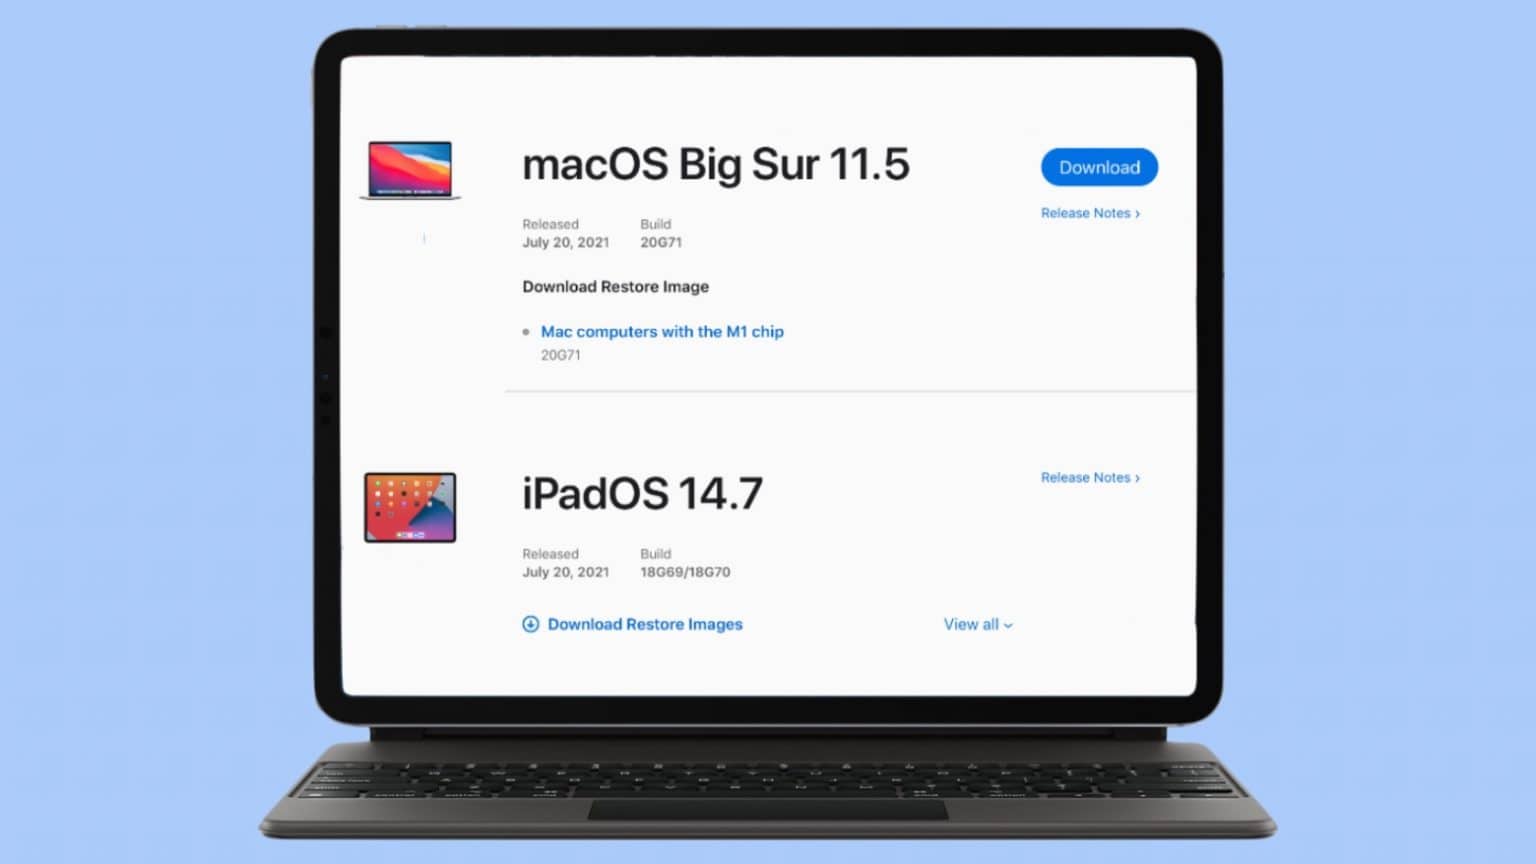 macOS Big Sur 11.5 and iPadOS 14.7 offer small tweaks and bug fixes